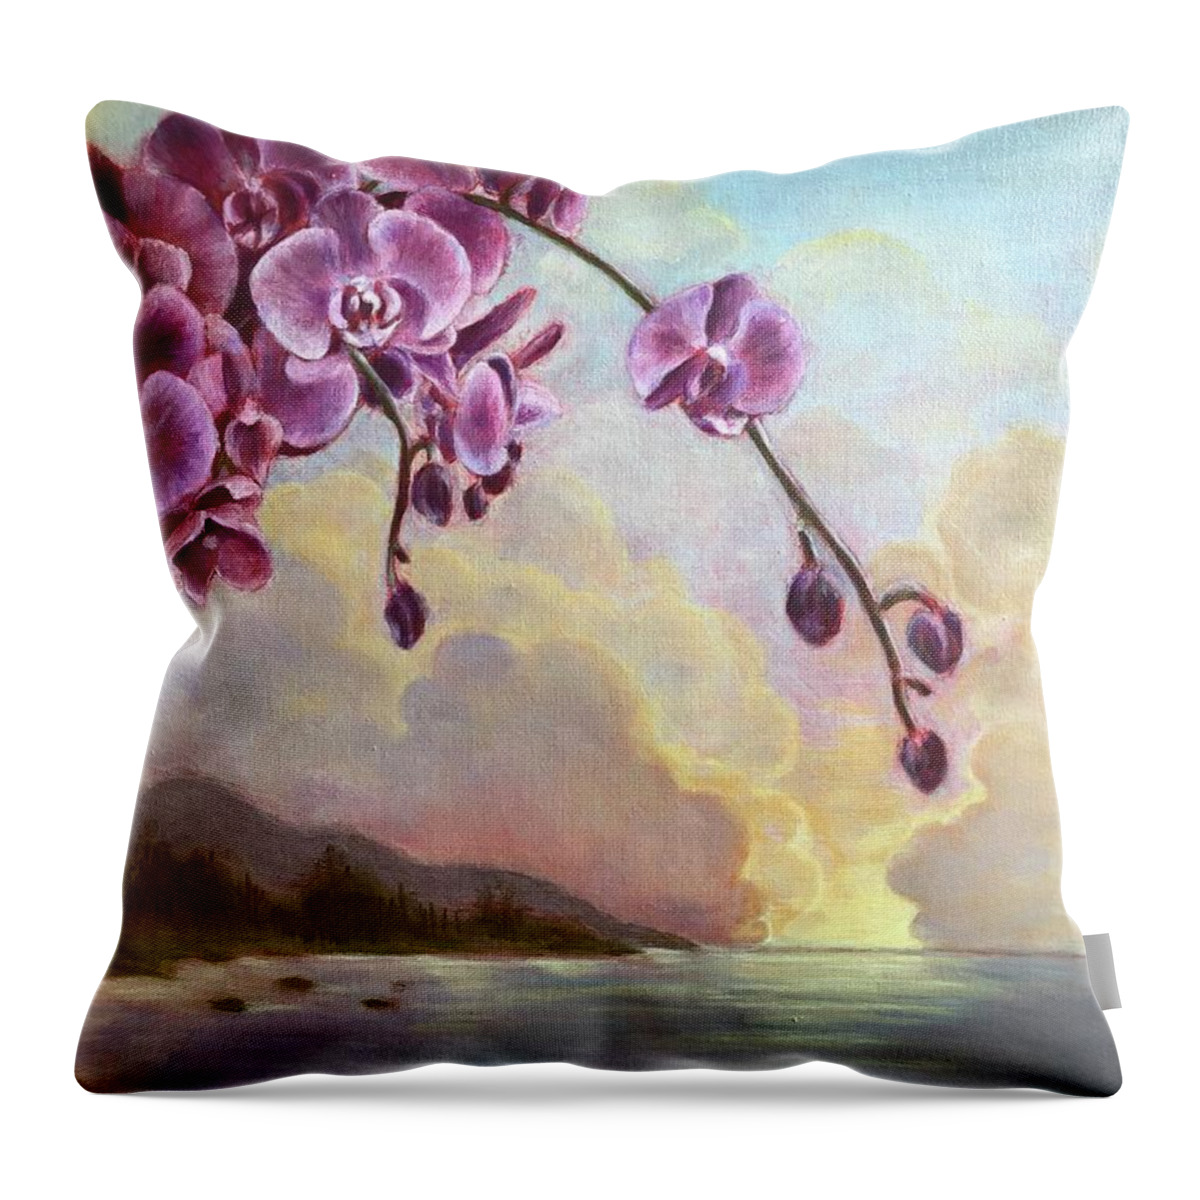 Orchids Throw Pillow featuring the painting Sunset Blooms by Vina Yang